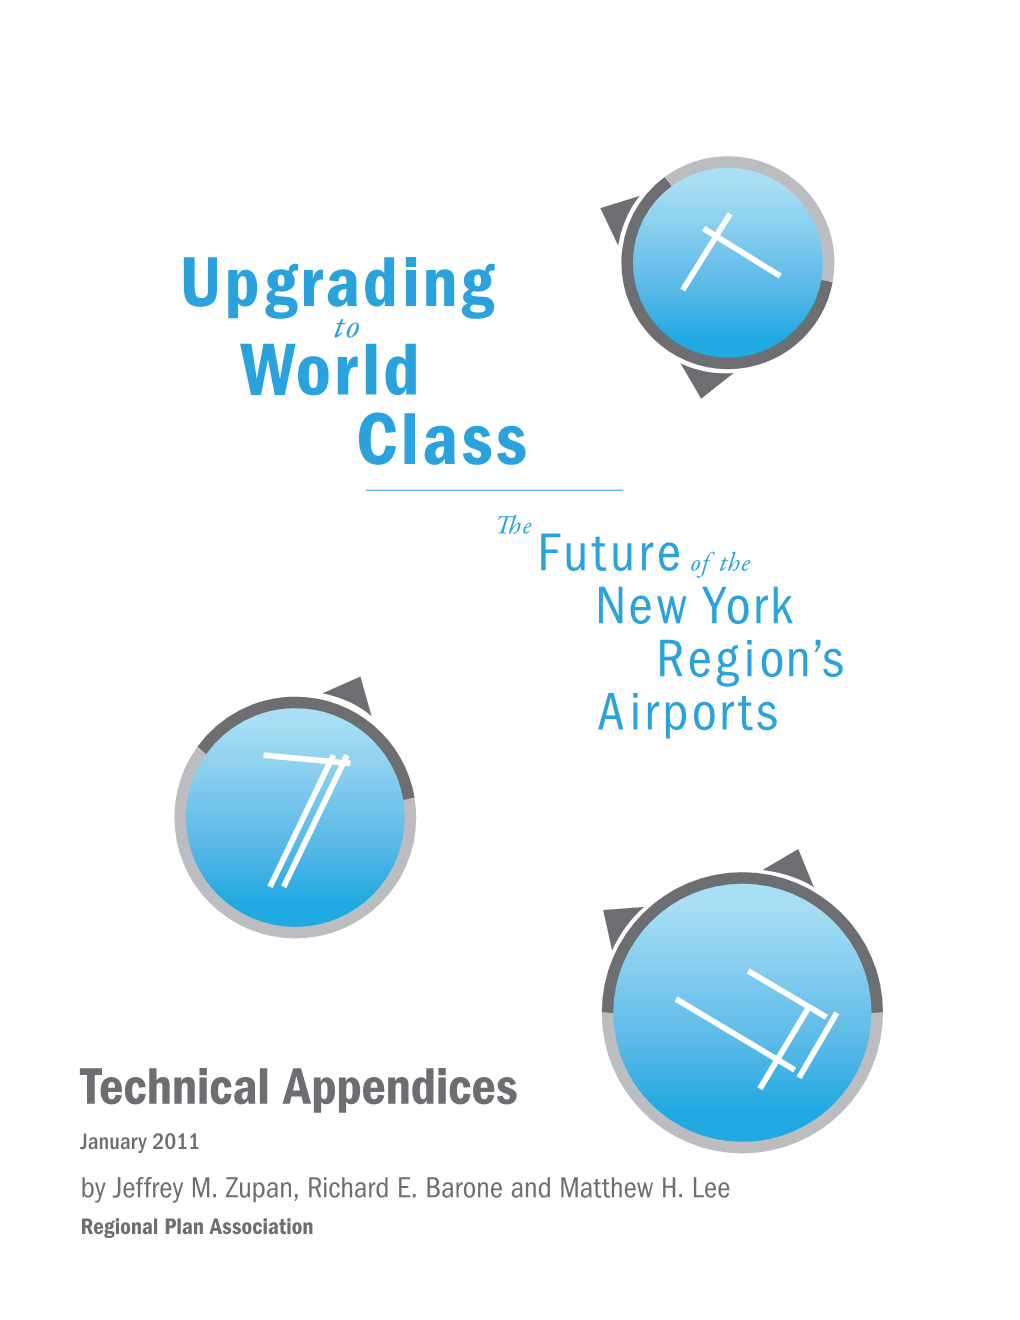 World Class: the Future of the Region’S Airports Regional Plan Association Association Plan Regional Airports Region’S the of Future the Class: World to Upgrading